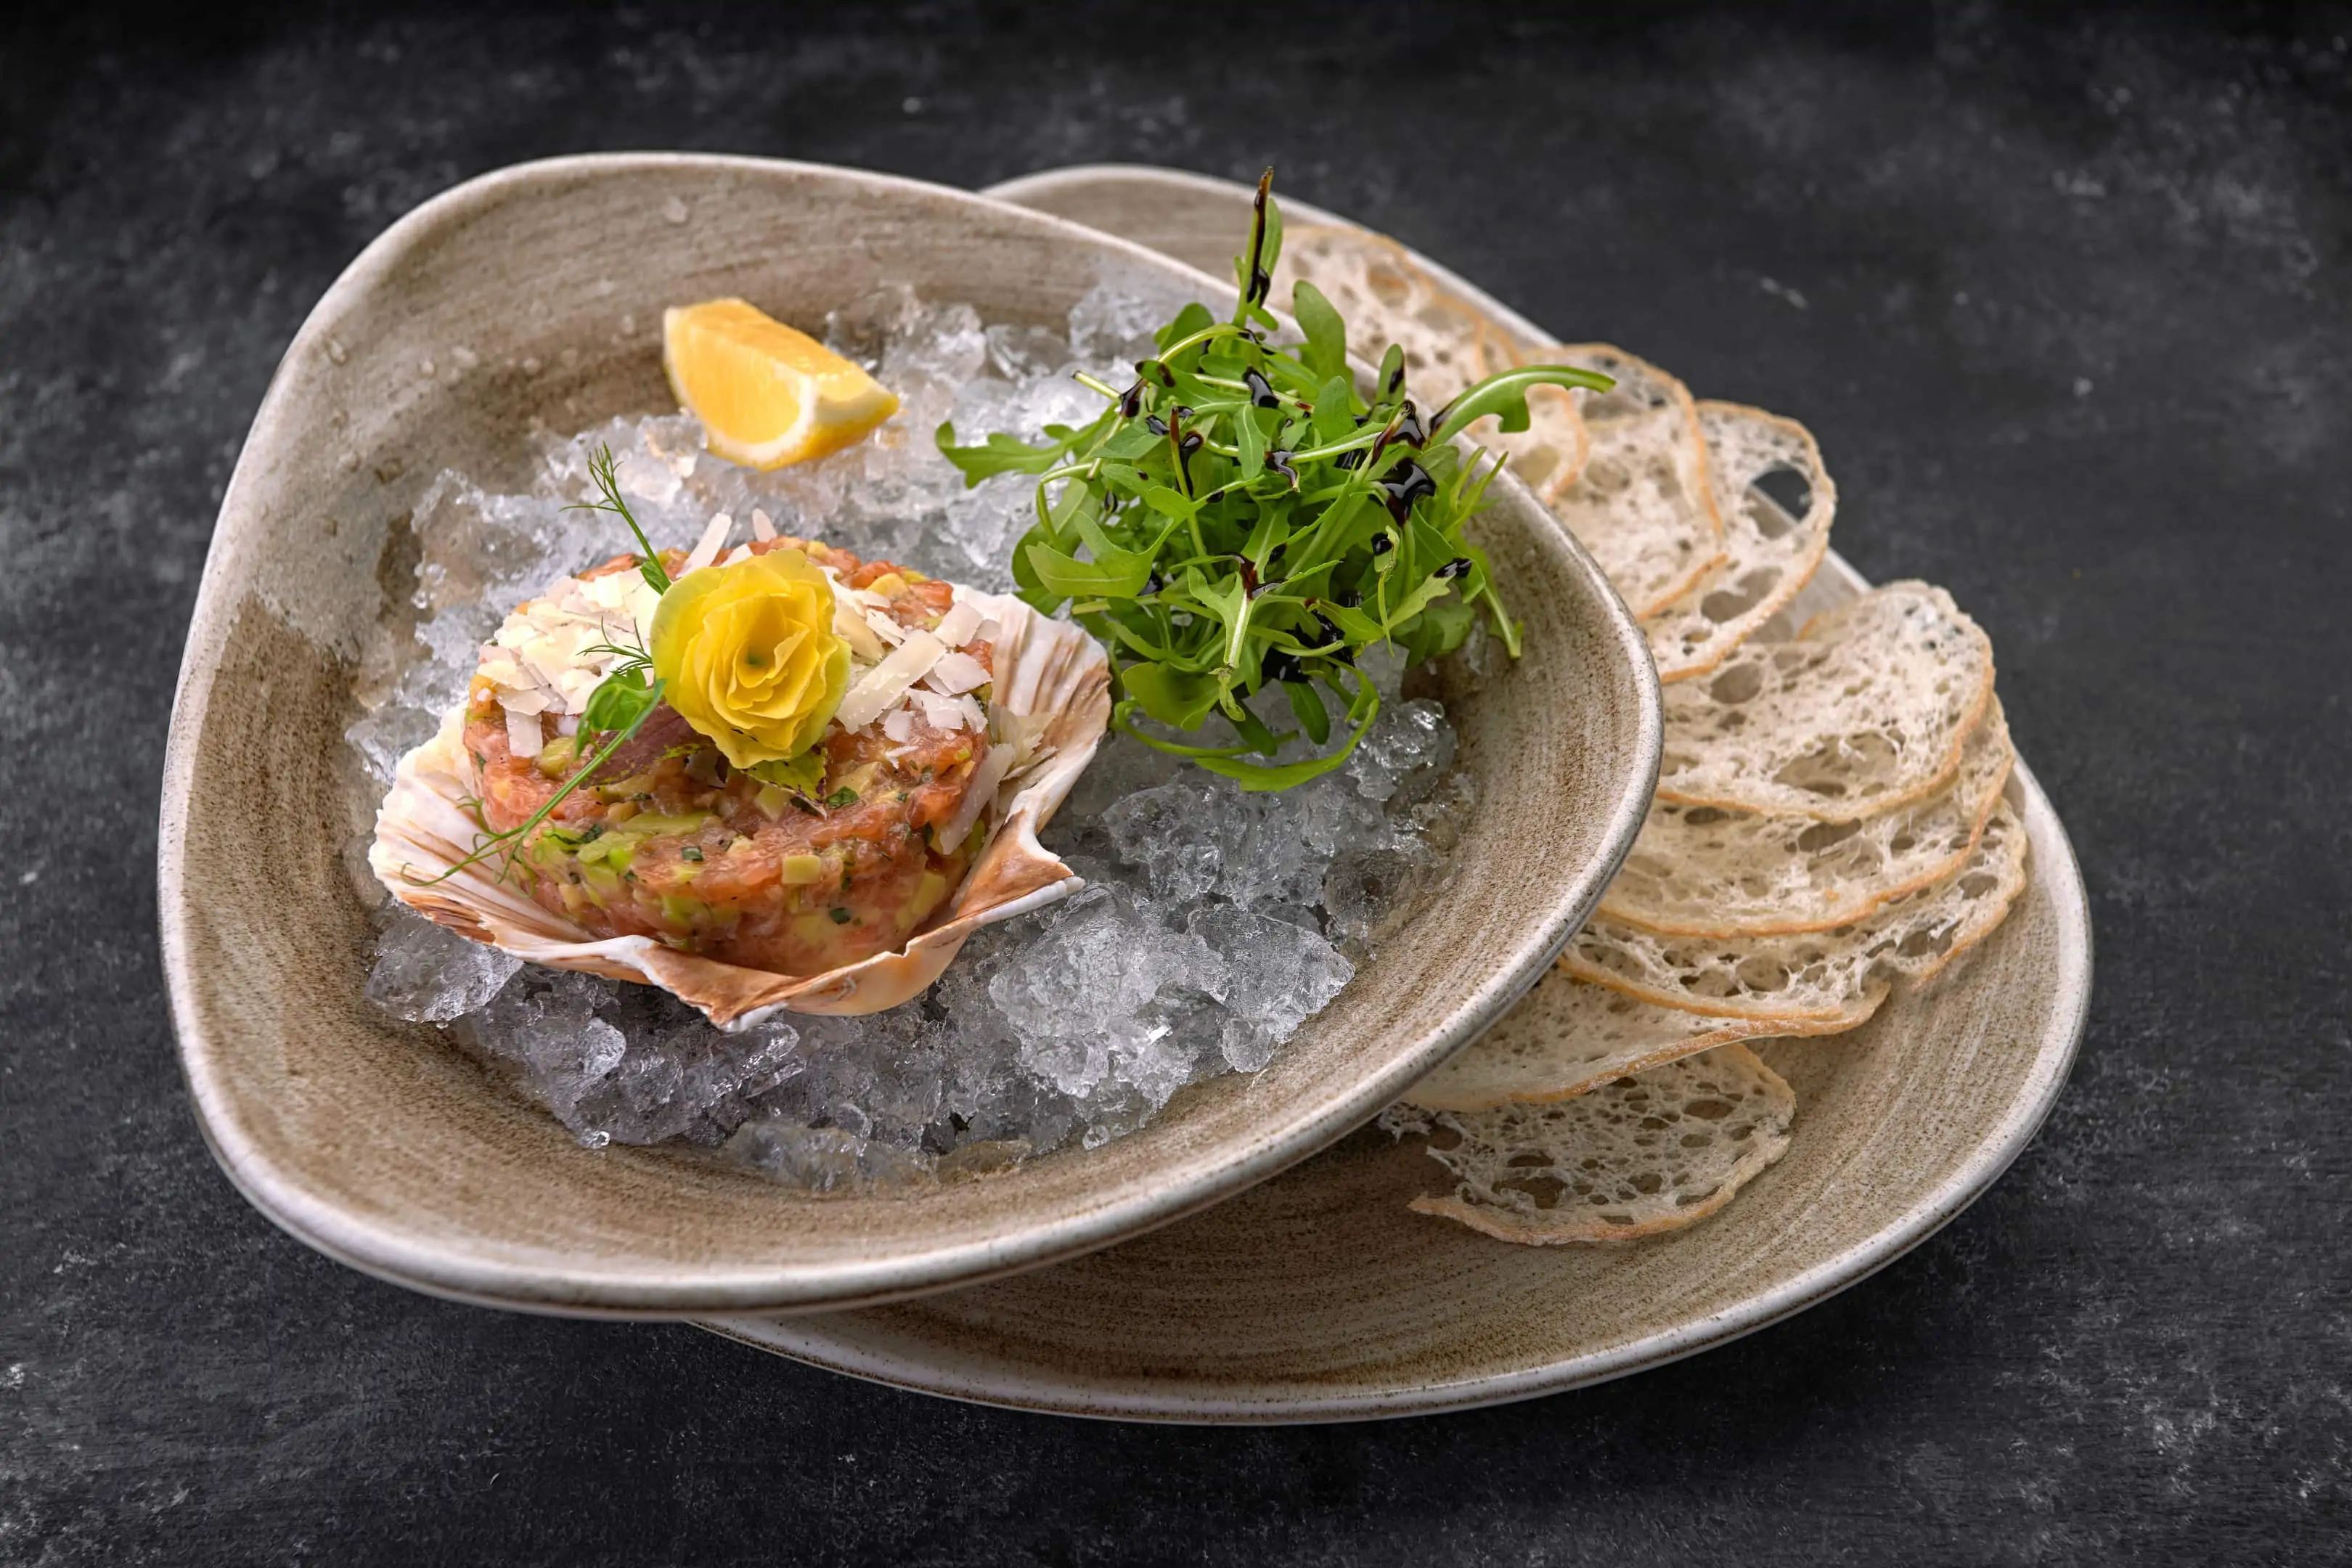 Salmon tartare with oysters, avocado, bread chips and lemon